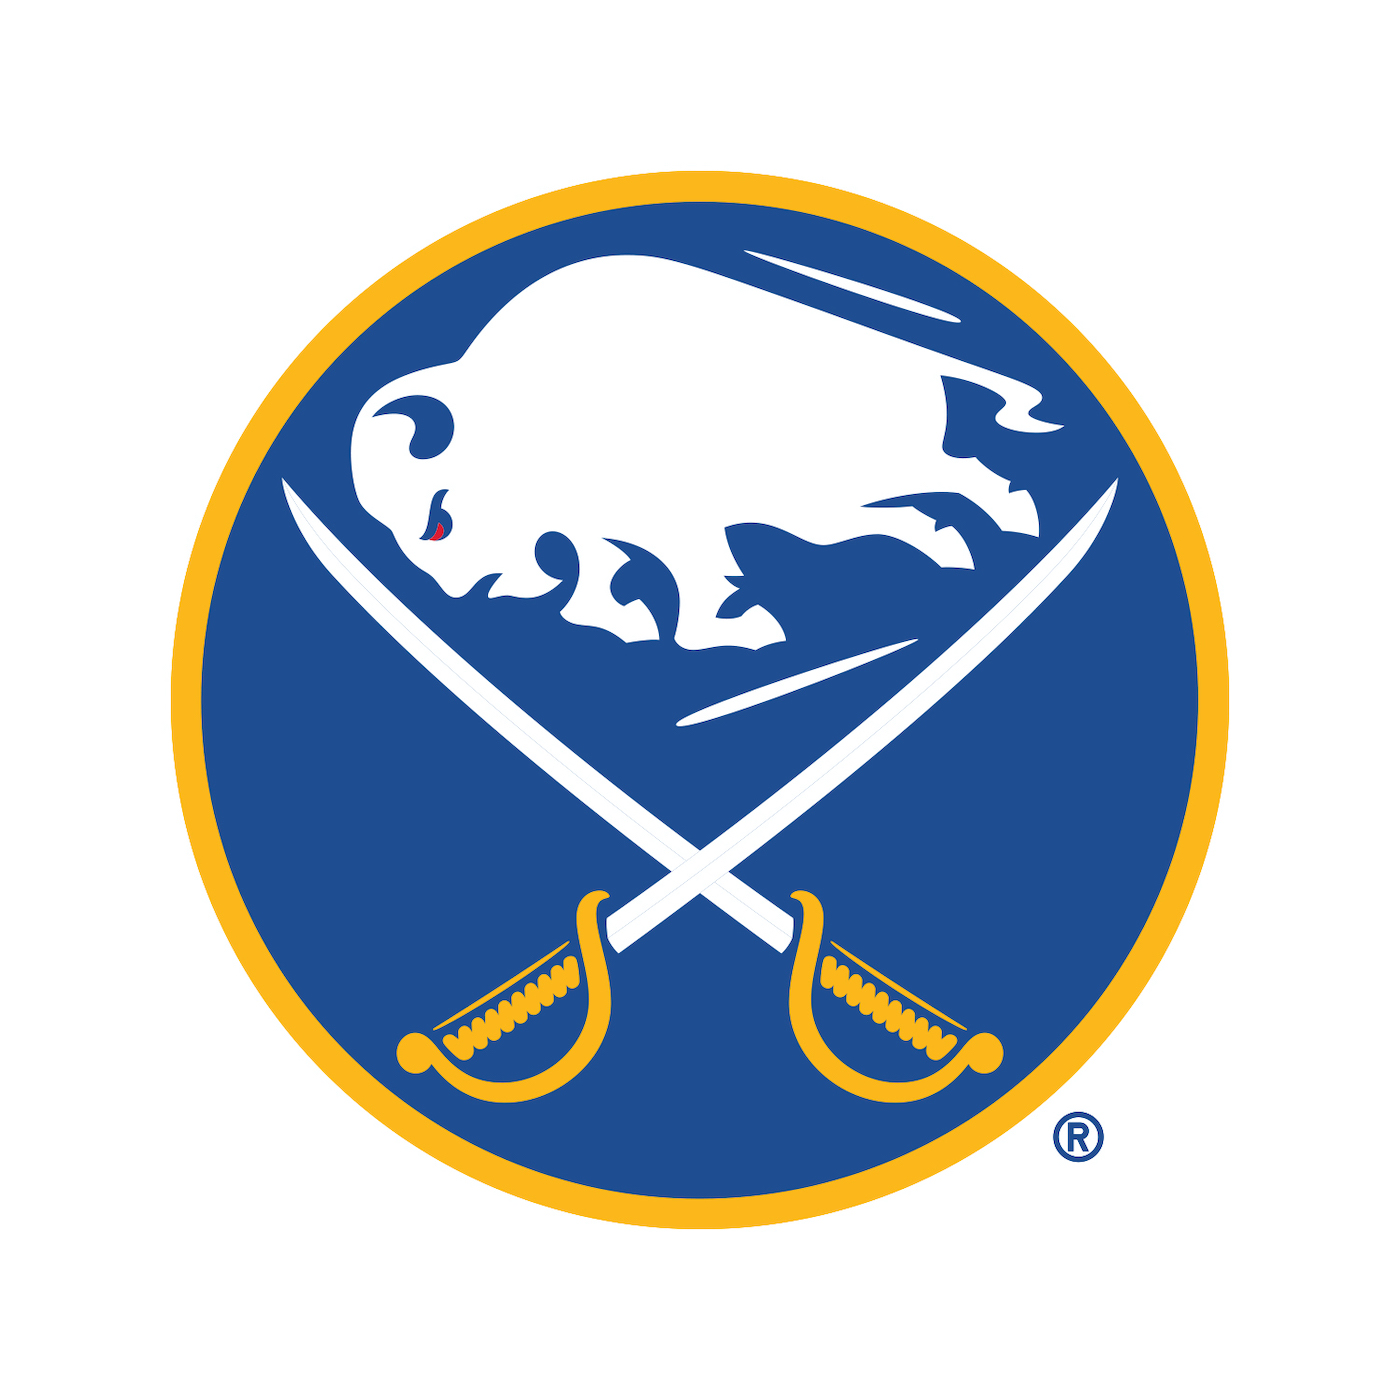 Image courtesy of the Buffalo Sabres Public Relations